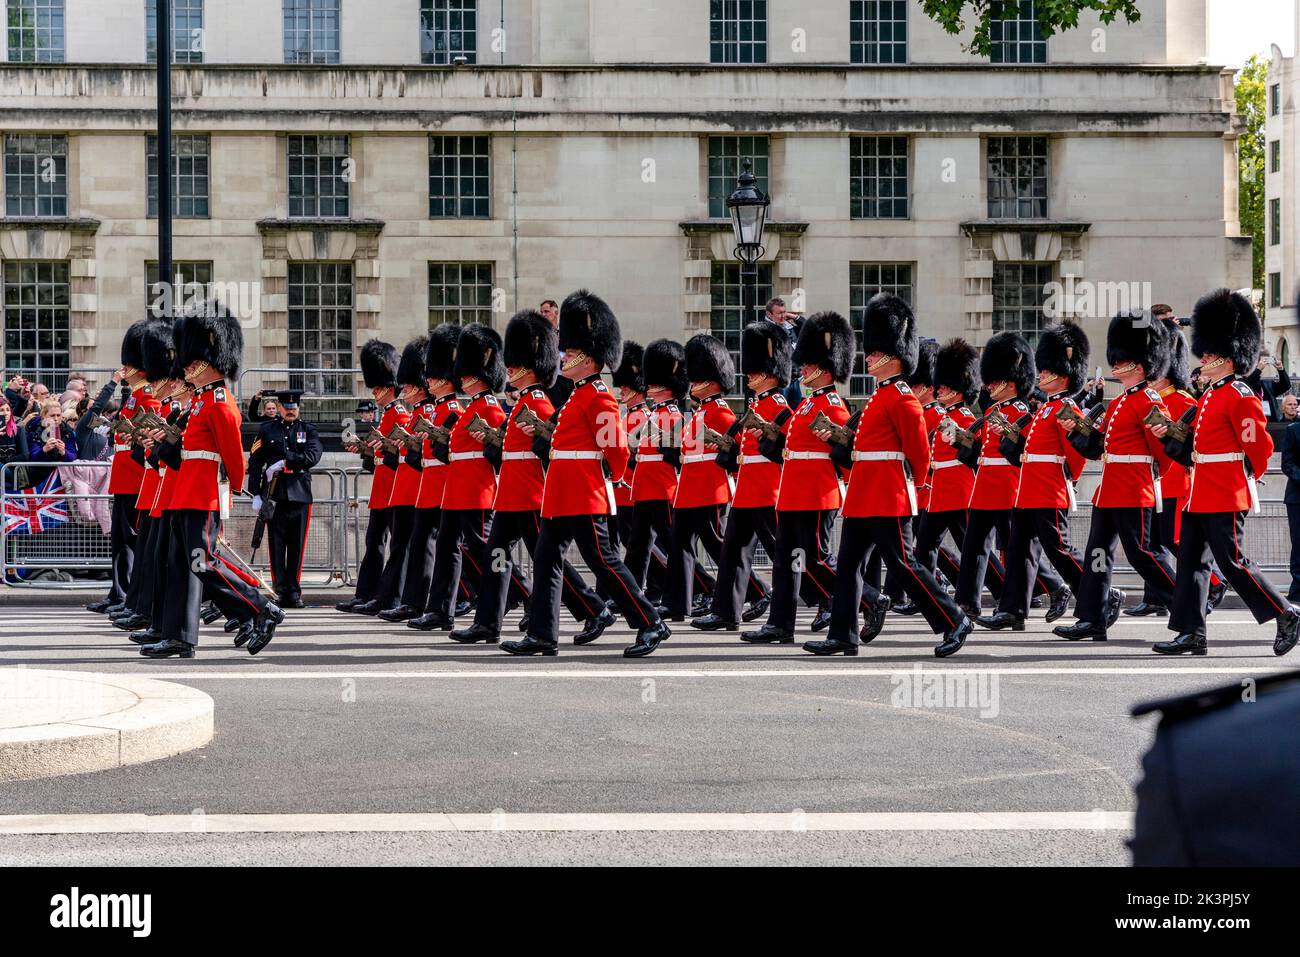 The Grenadier Guards Take Part In Queen Elizabeth II Funeral Procession, Whitehall, London, UK. Stock Photo